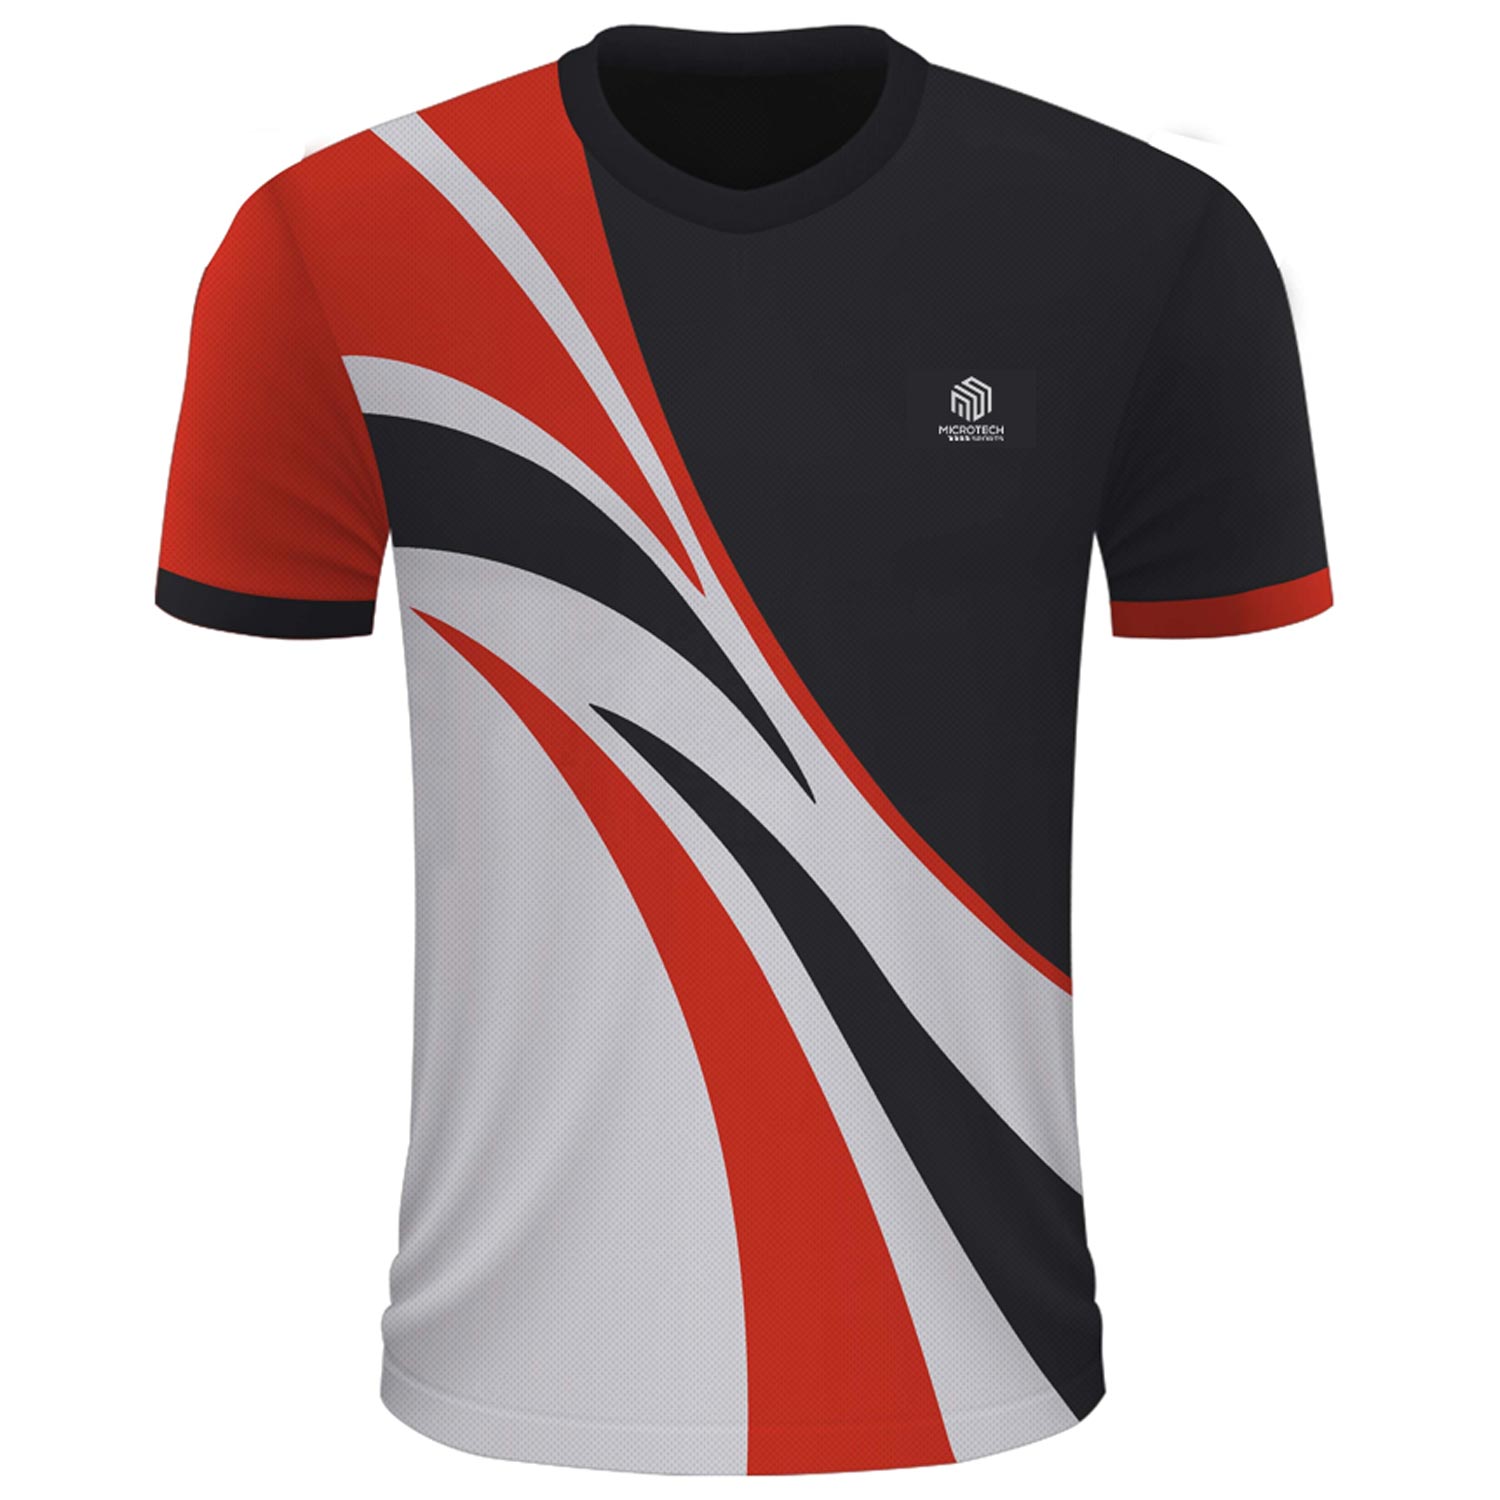 Sublimated Jerseys - Microtech Sports